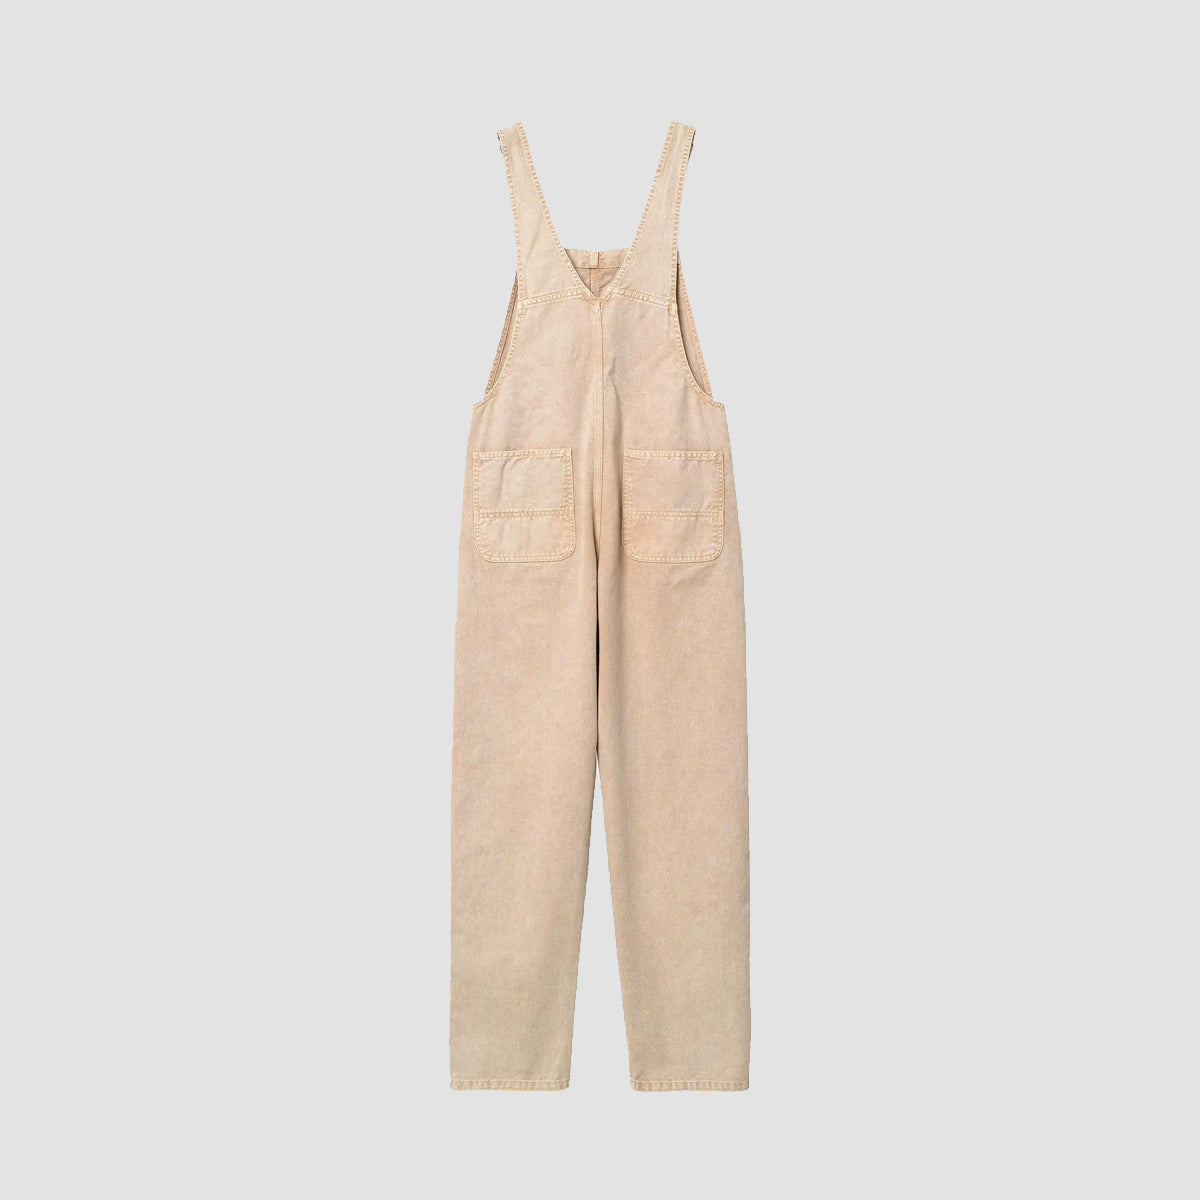 Carhartt WIP Sonora Overall Dusty Hamilton Brown Worn Washed - Womens